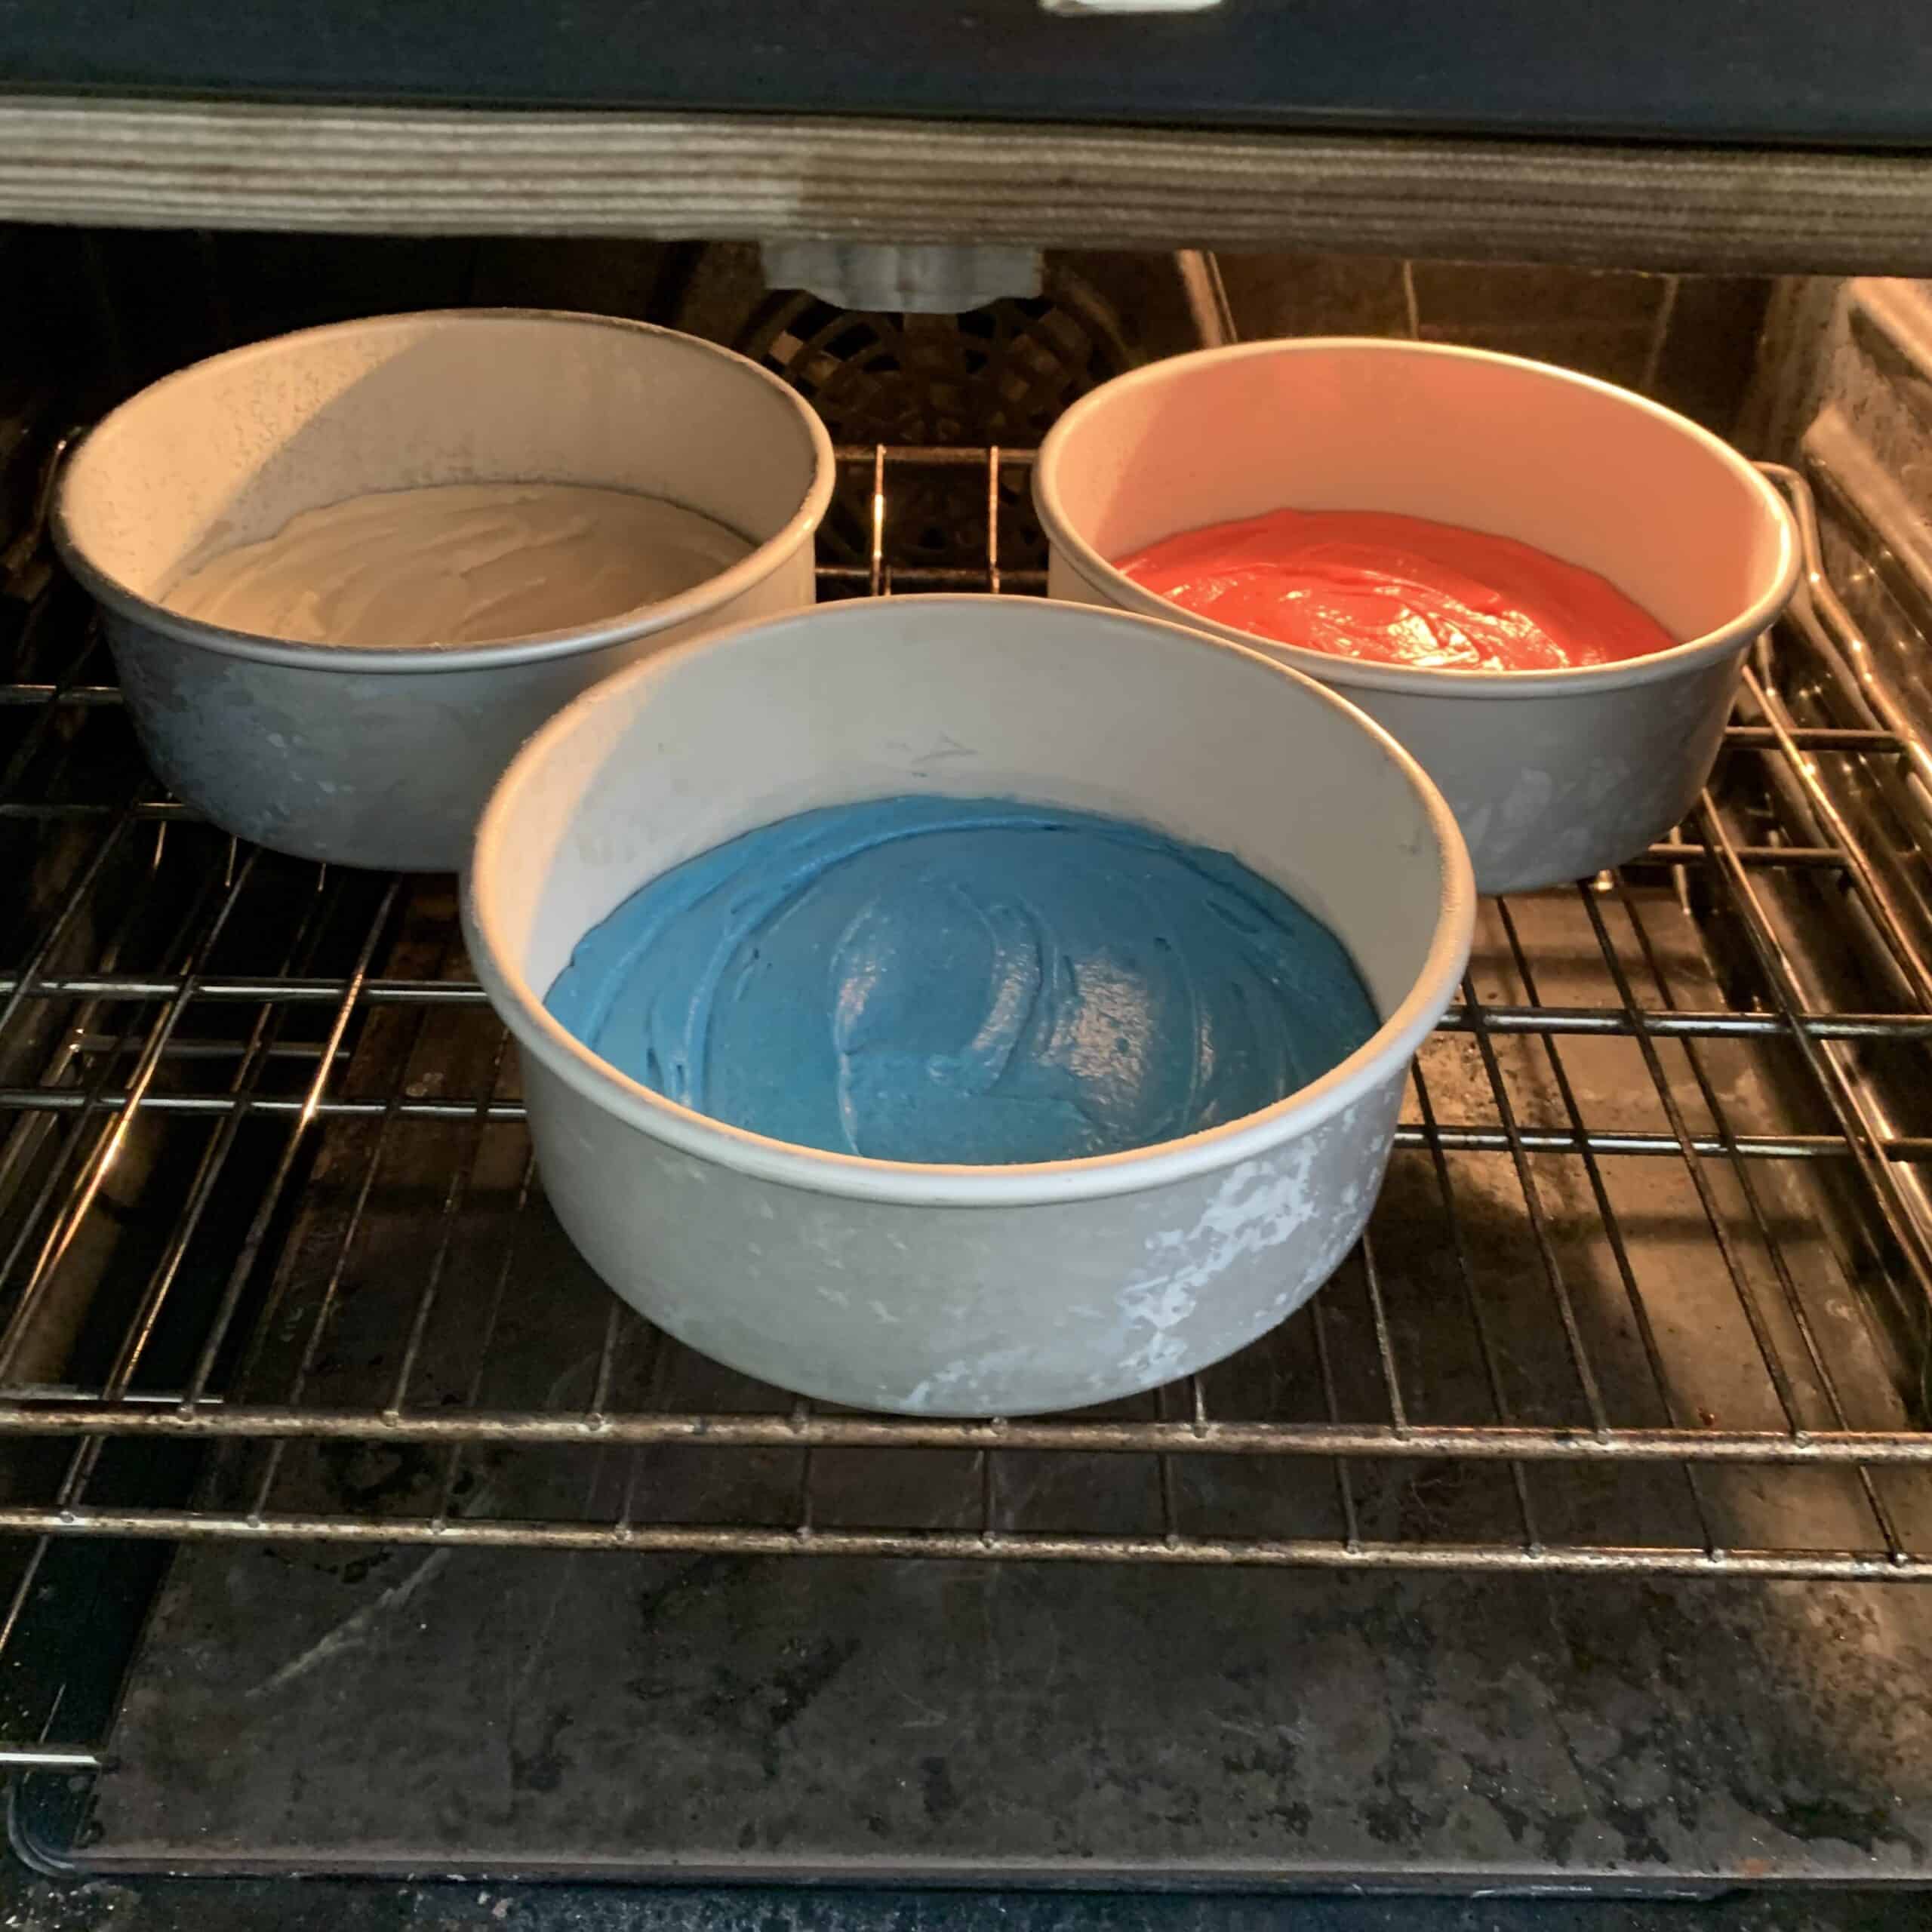 cake pans in oven with red blue and white batters